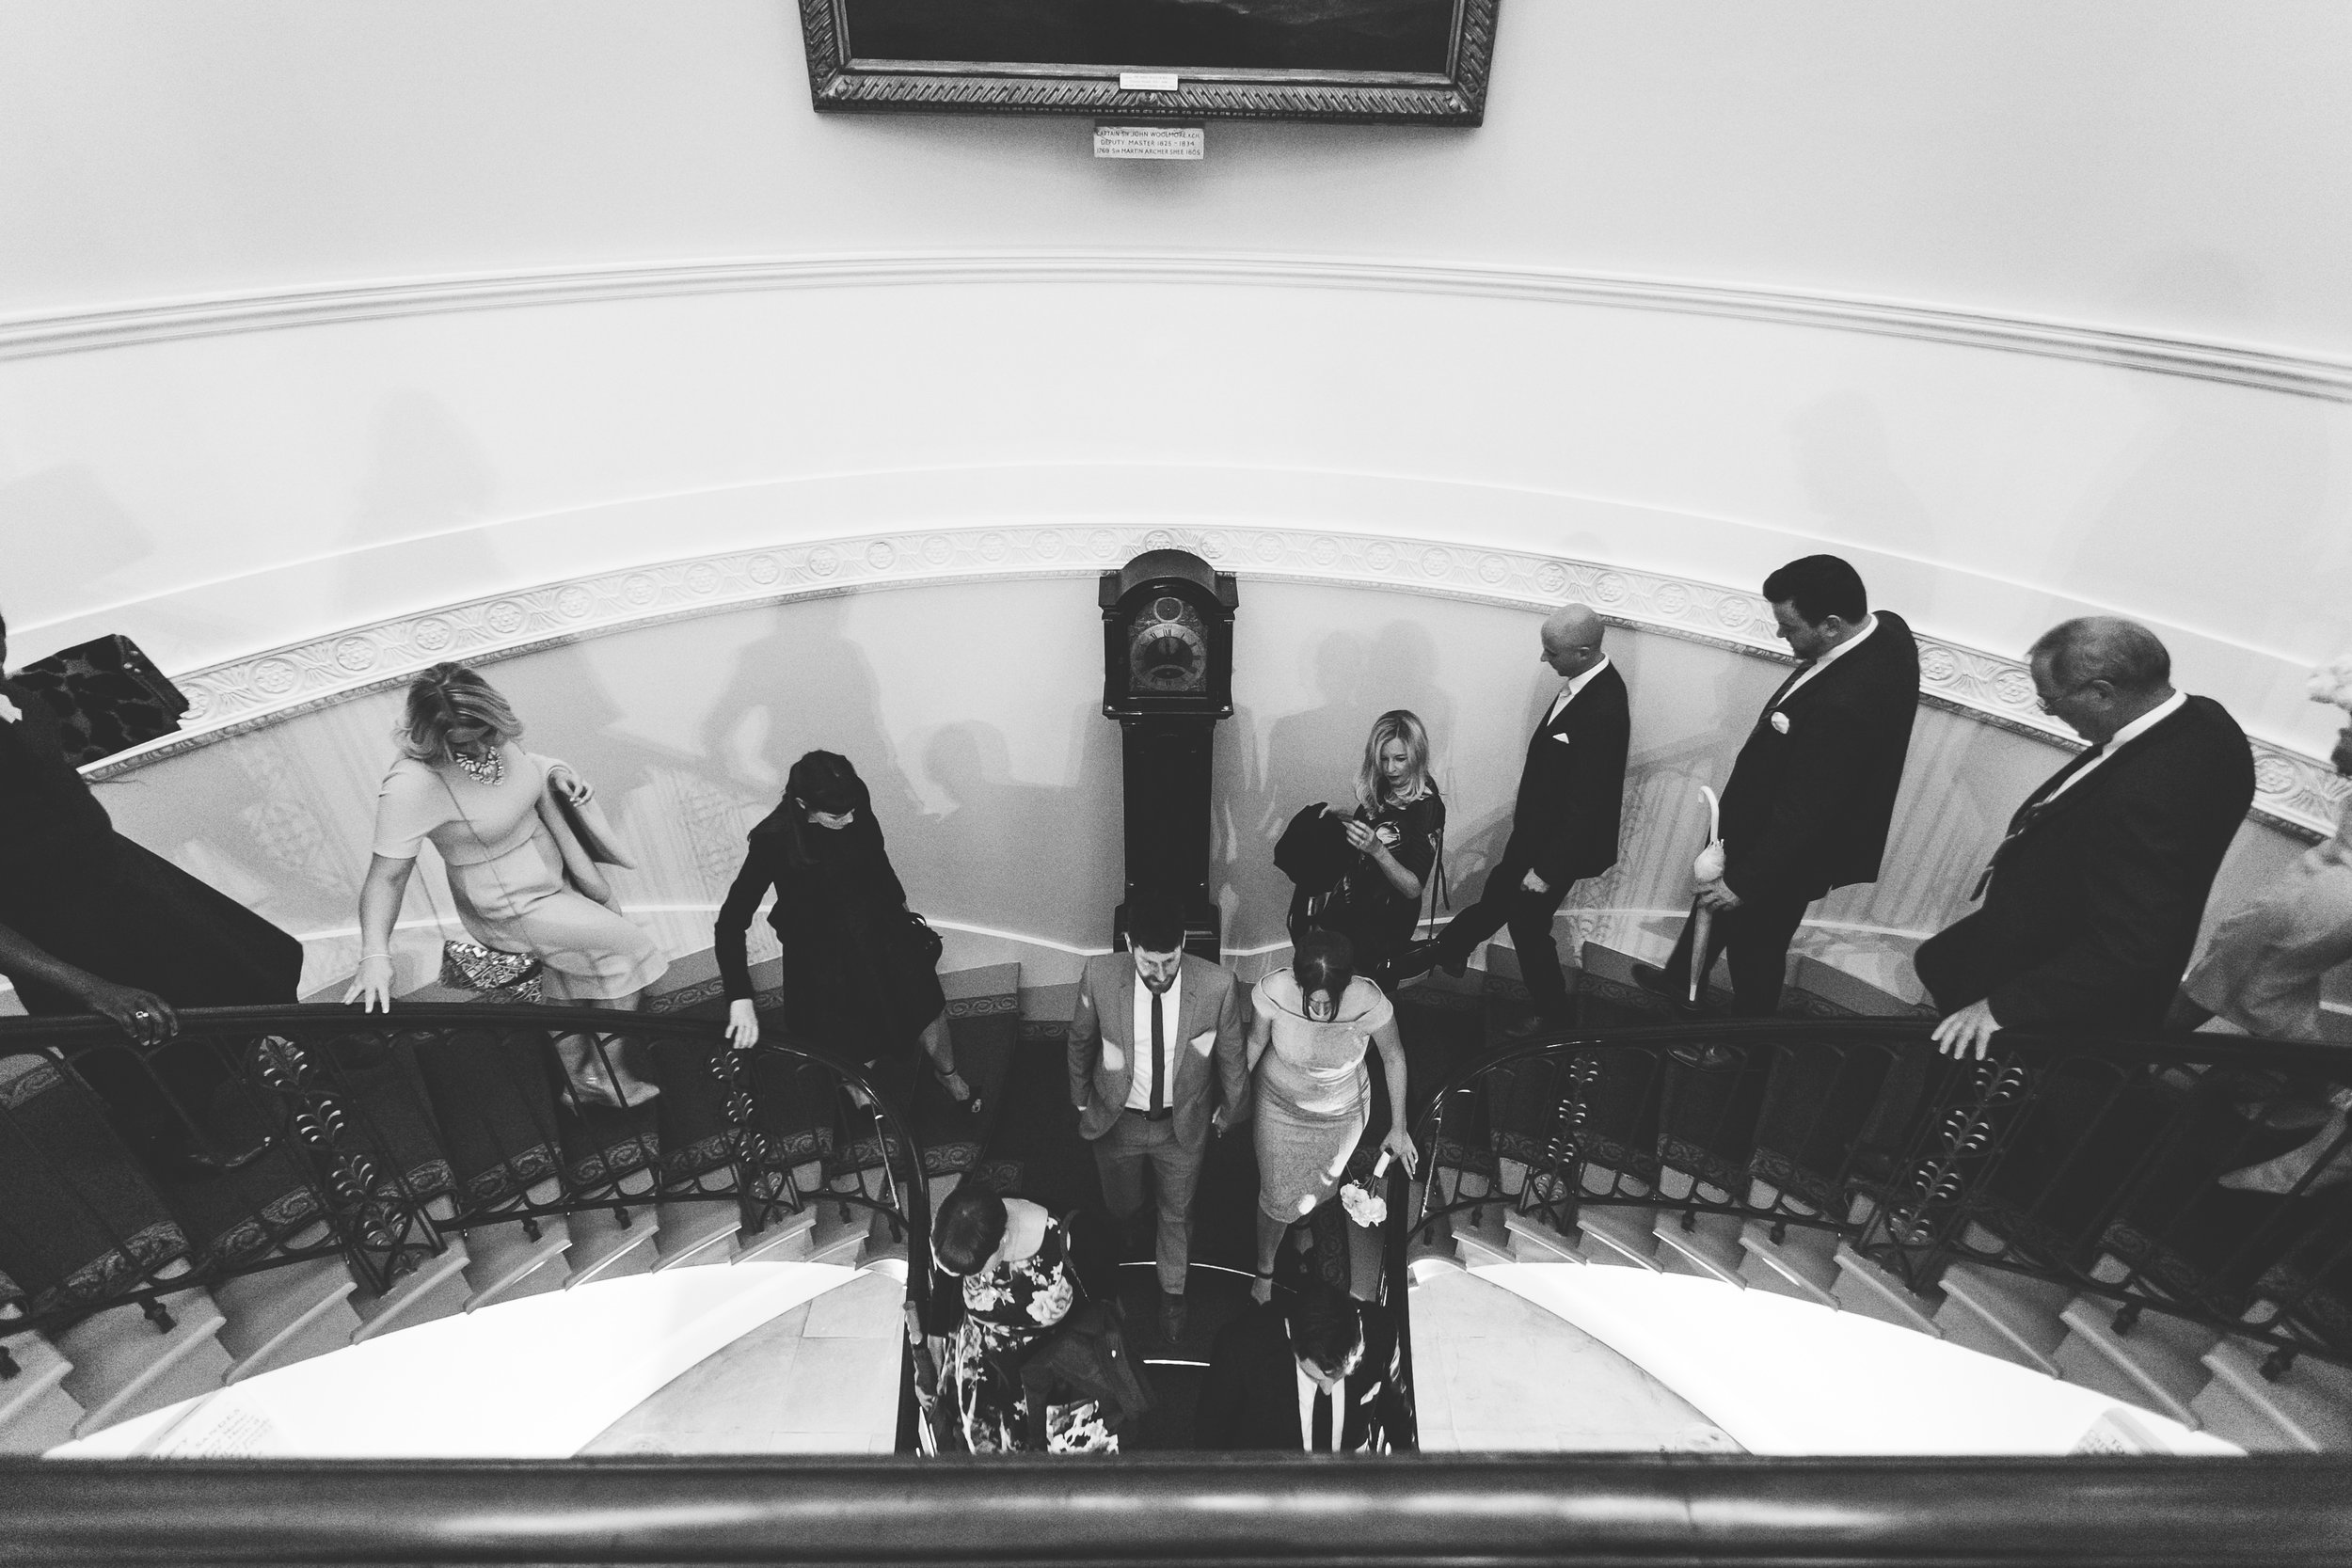 Alex and Ian-Wedding-at-Trinity House-Oyster Shed London-tom-biddle-photography - tb0014.jpg